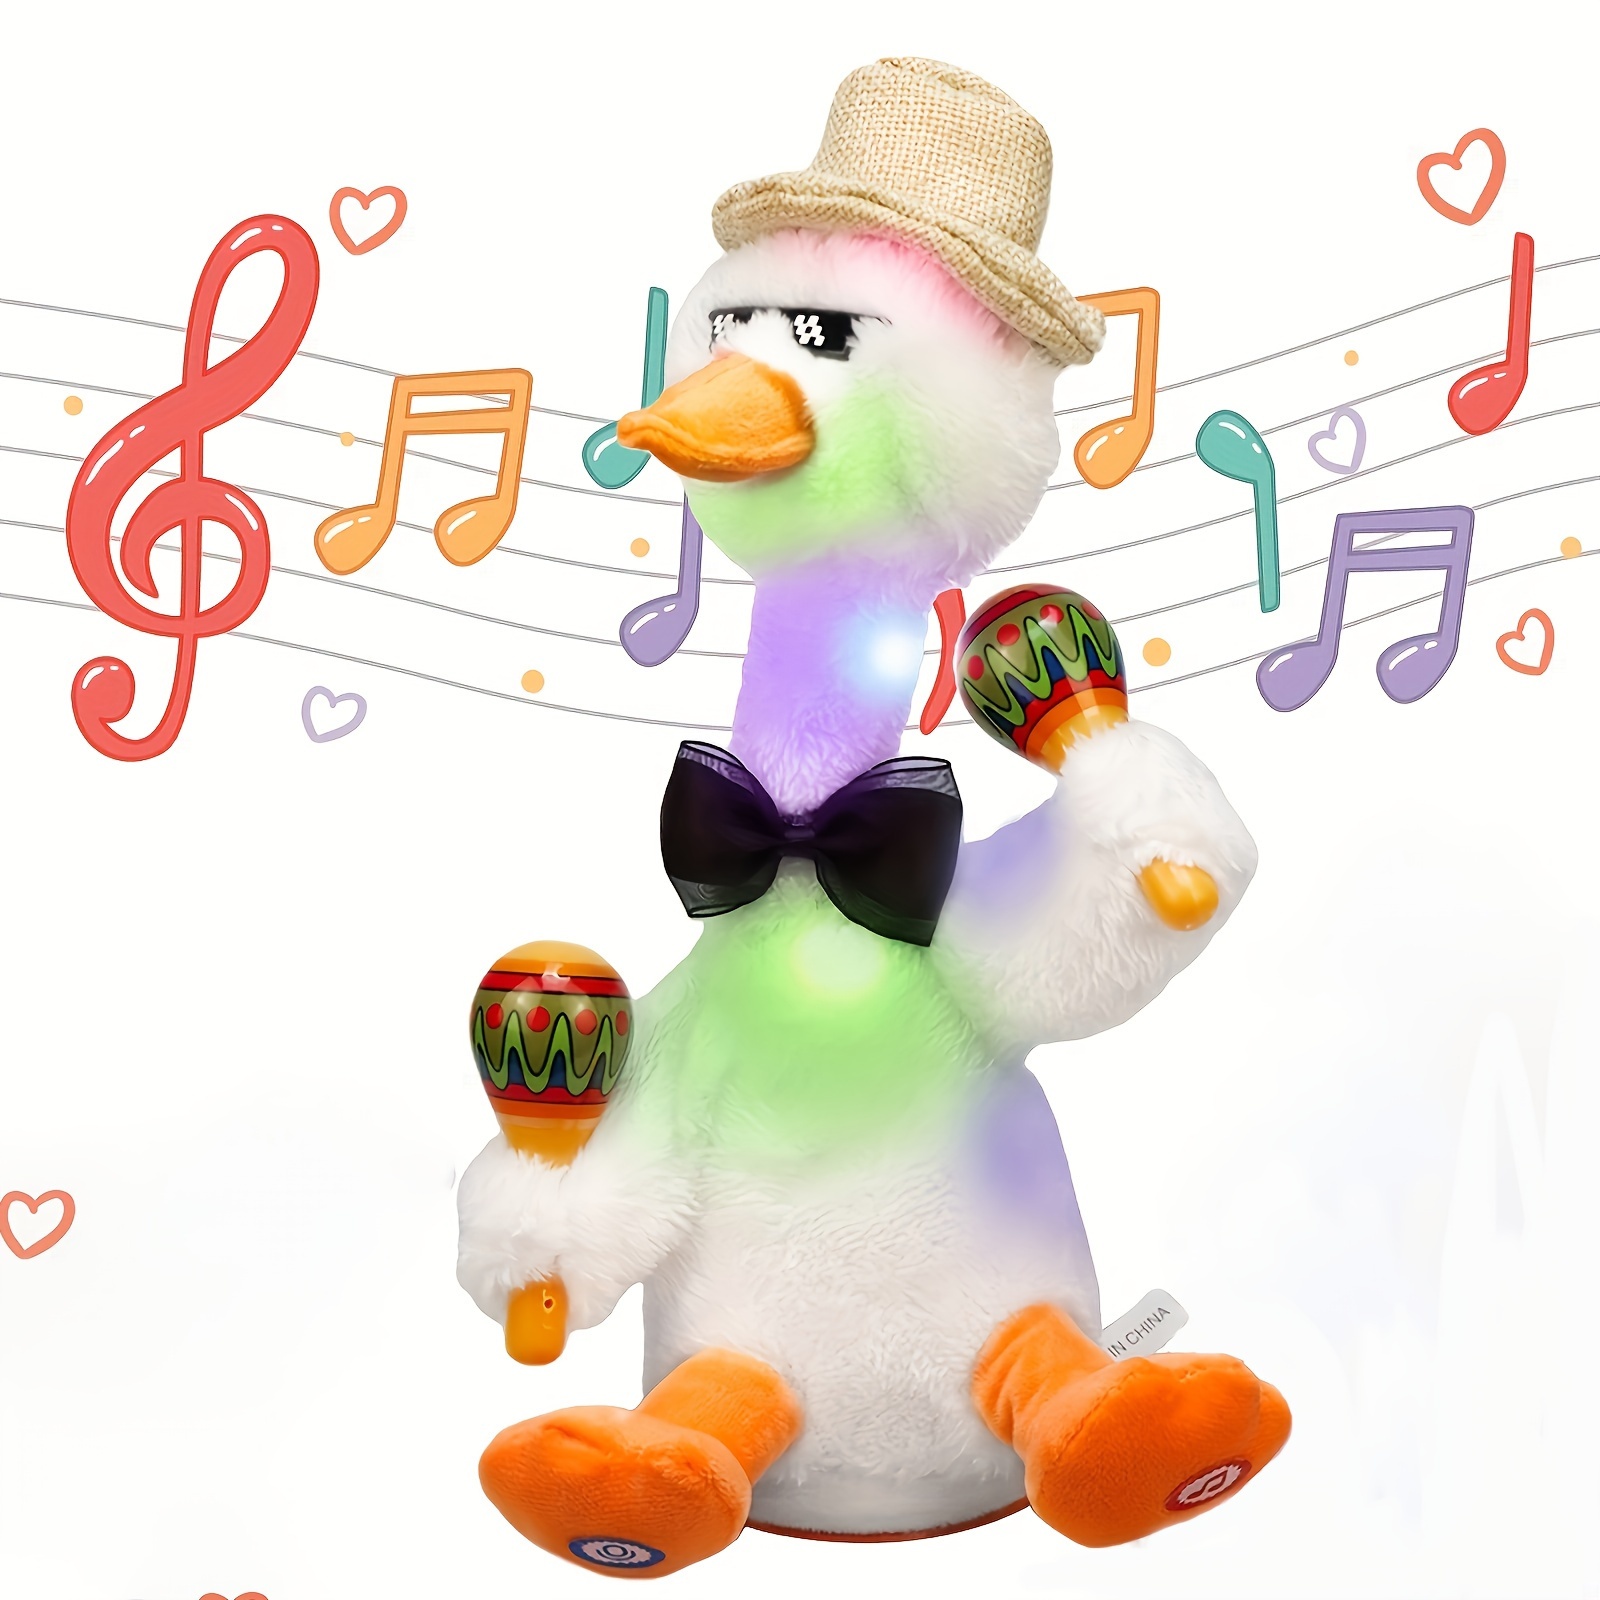 

Singing Duck Plush Toy For Pet, Interactive Recording And Talking Stuffed Animal With Lighting, Soft Polyester Carton Style Musical Duck With Hat (batteries Not Included)